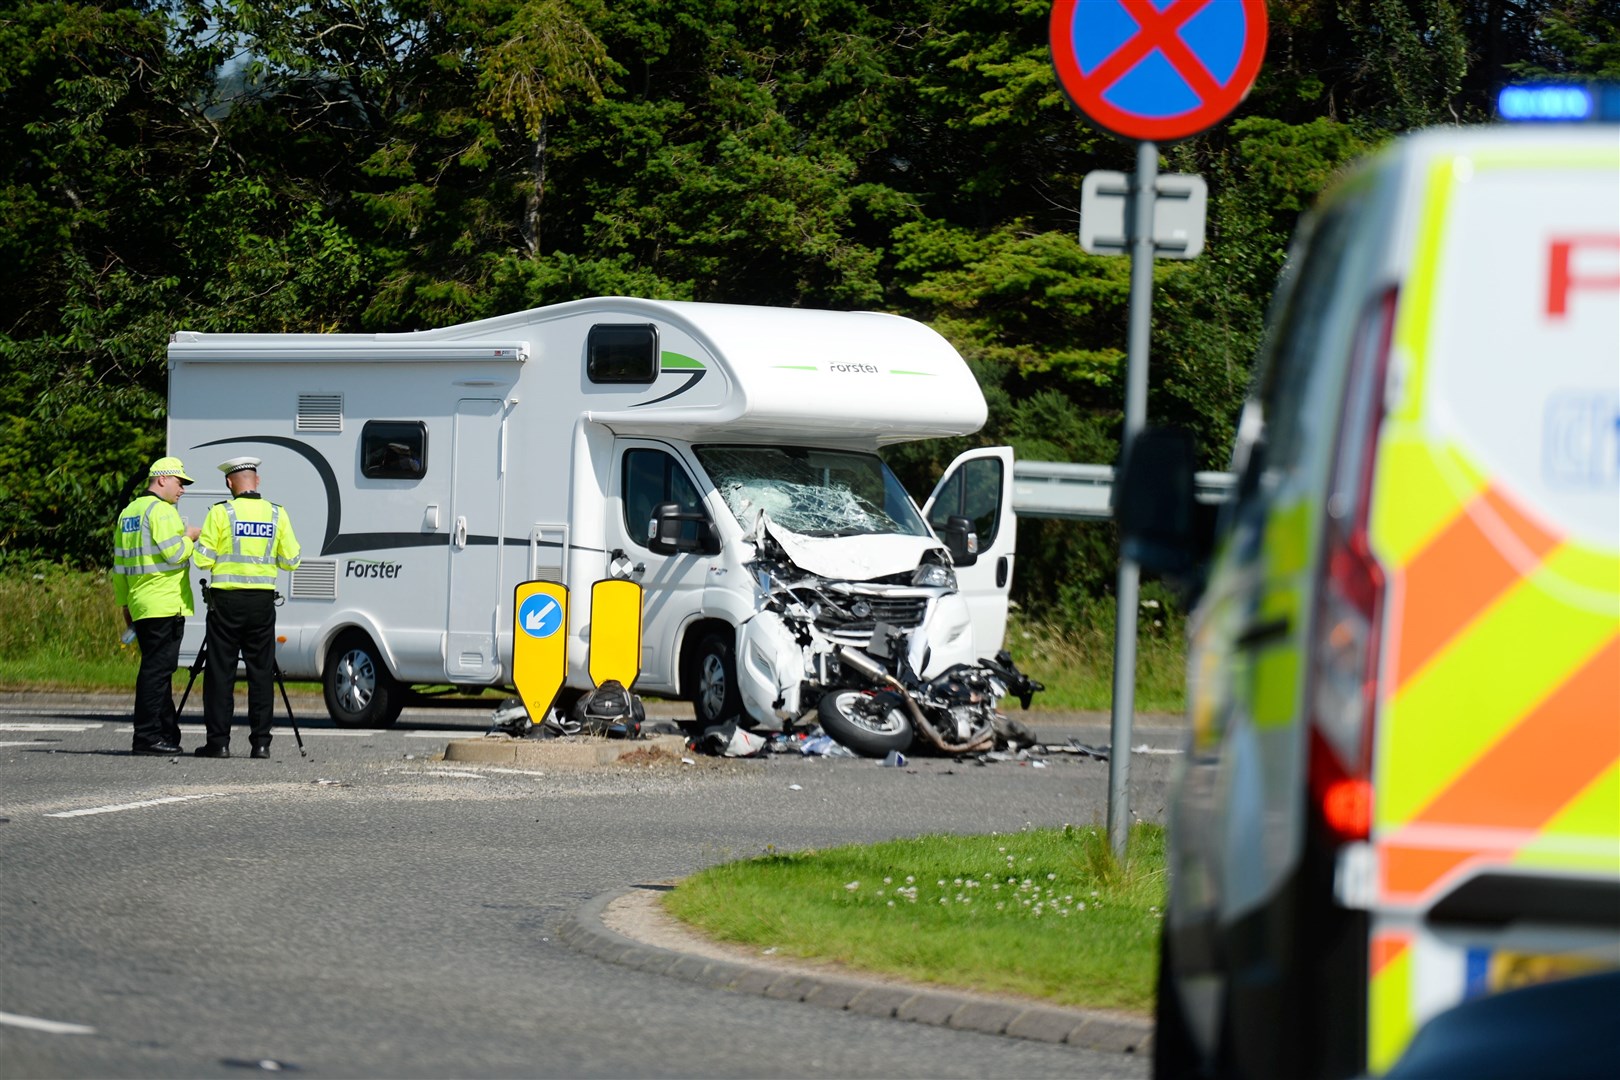 The scene of the crash, which involved a campervan and motorcycle. Picture: SPP.